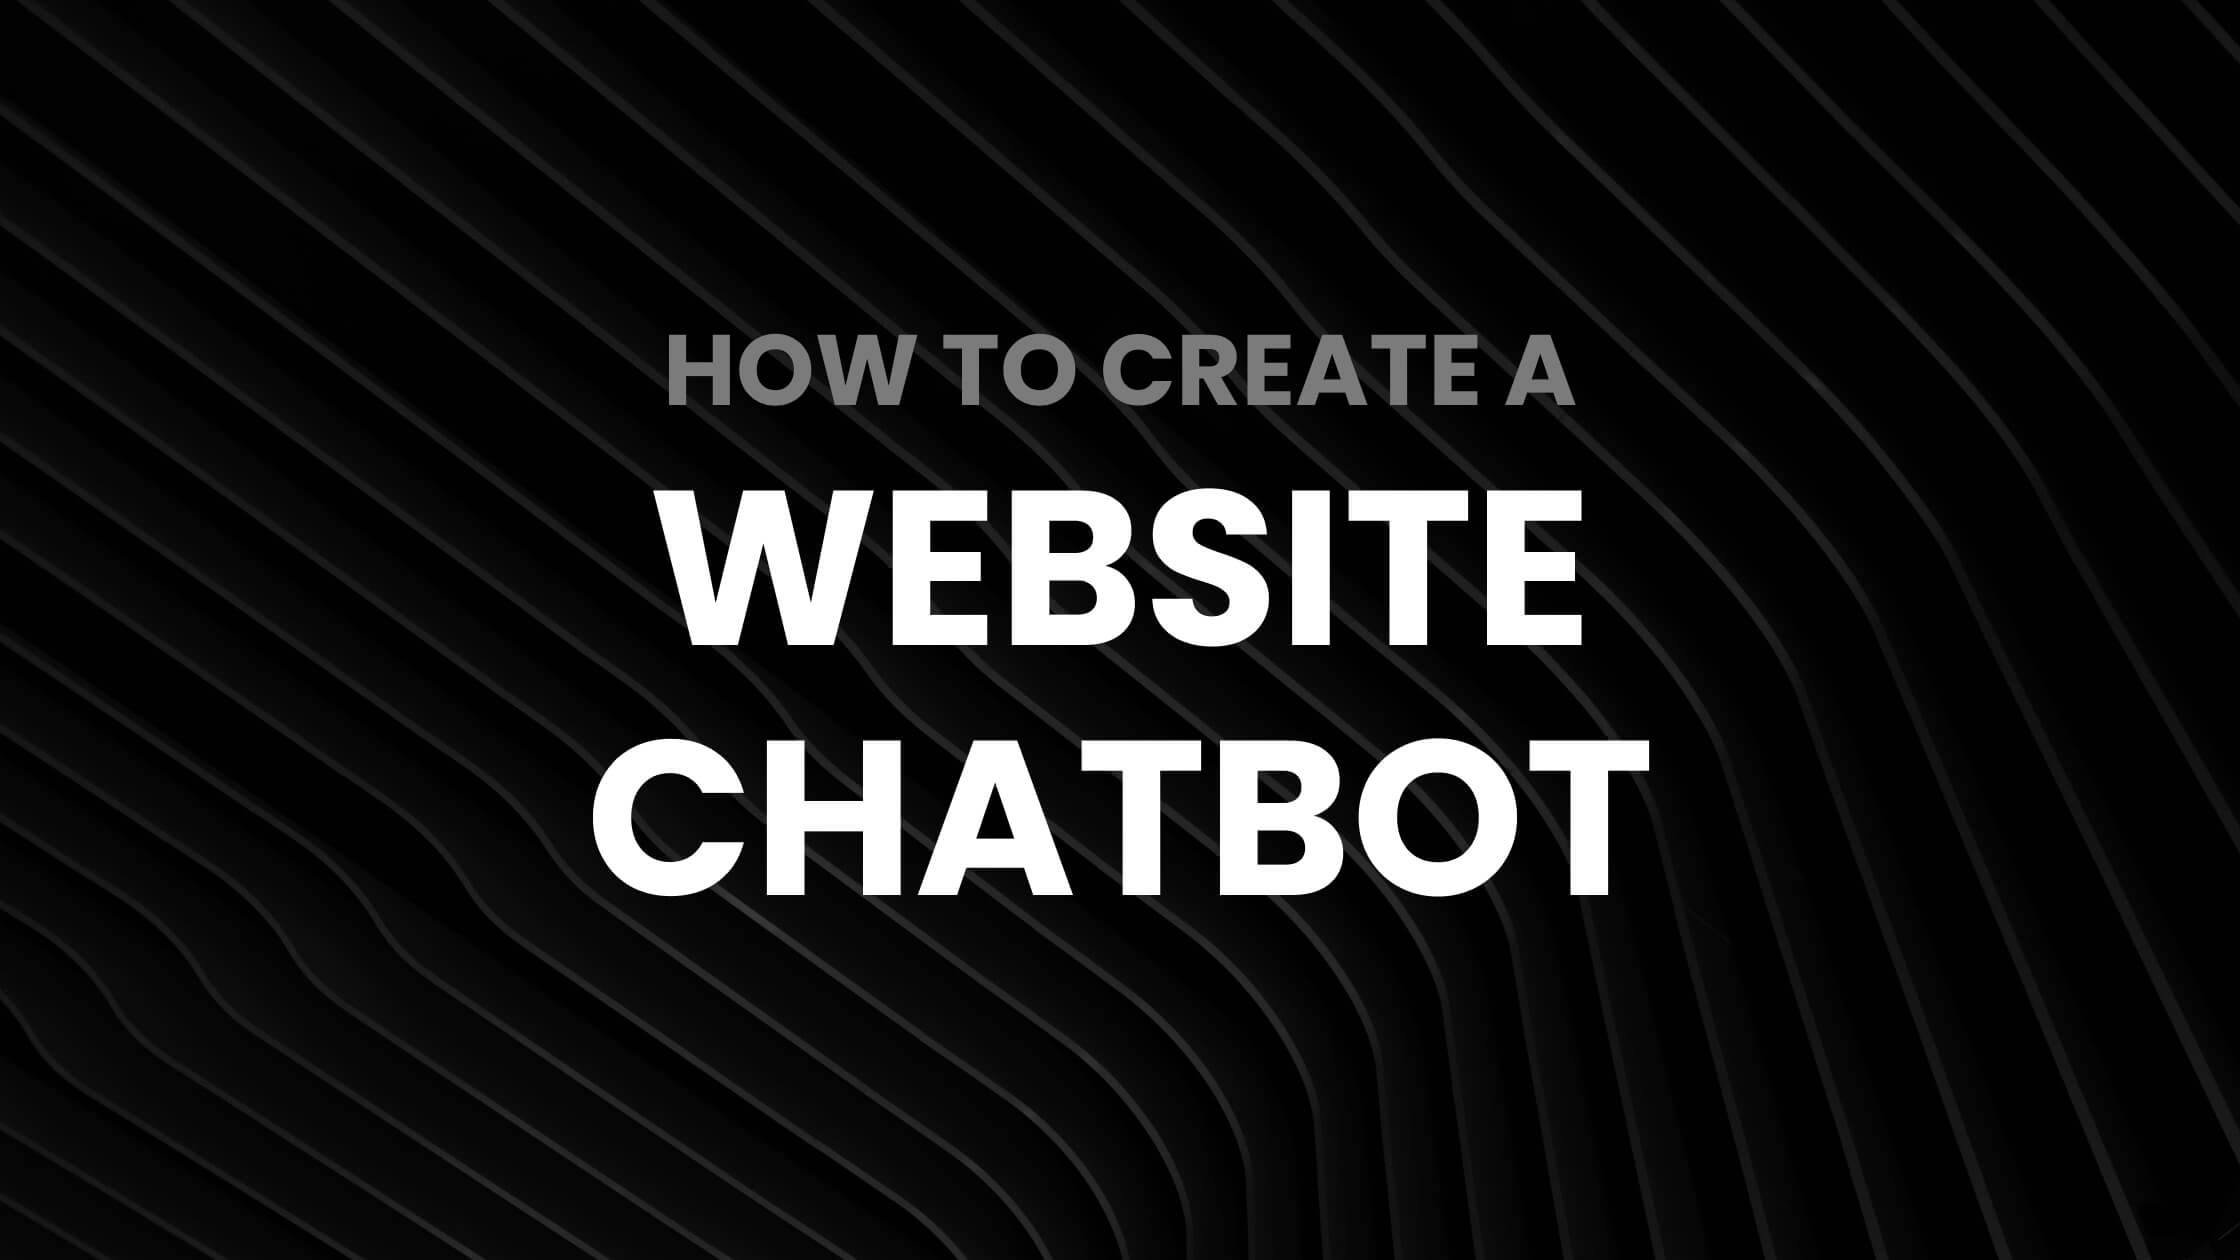 How to Create a Website Chatbot